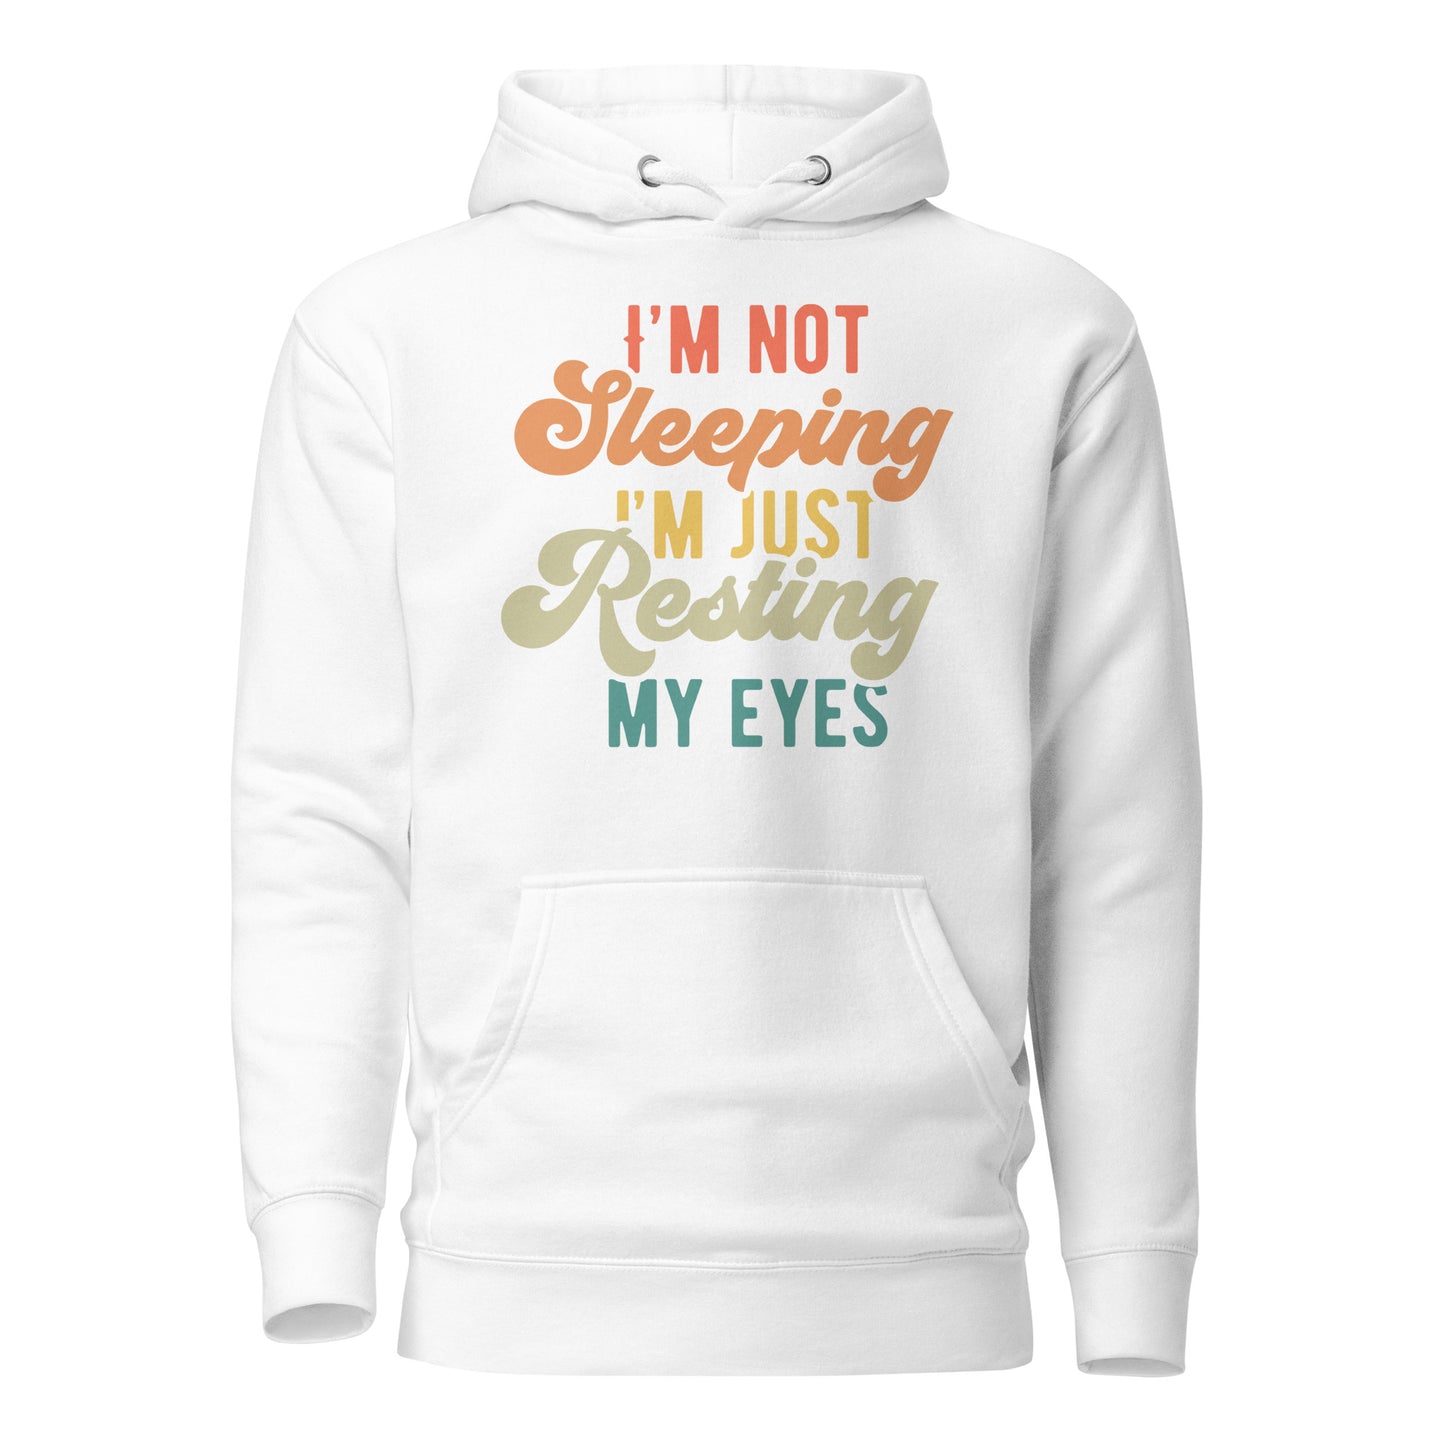 I'm Not Sleeping, I'm Just Resting My Eyes Cotton Heritage Adult Hoodie